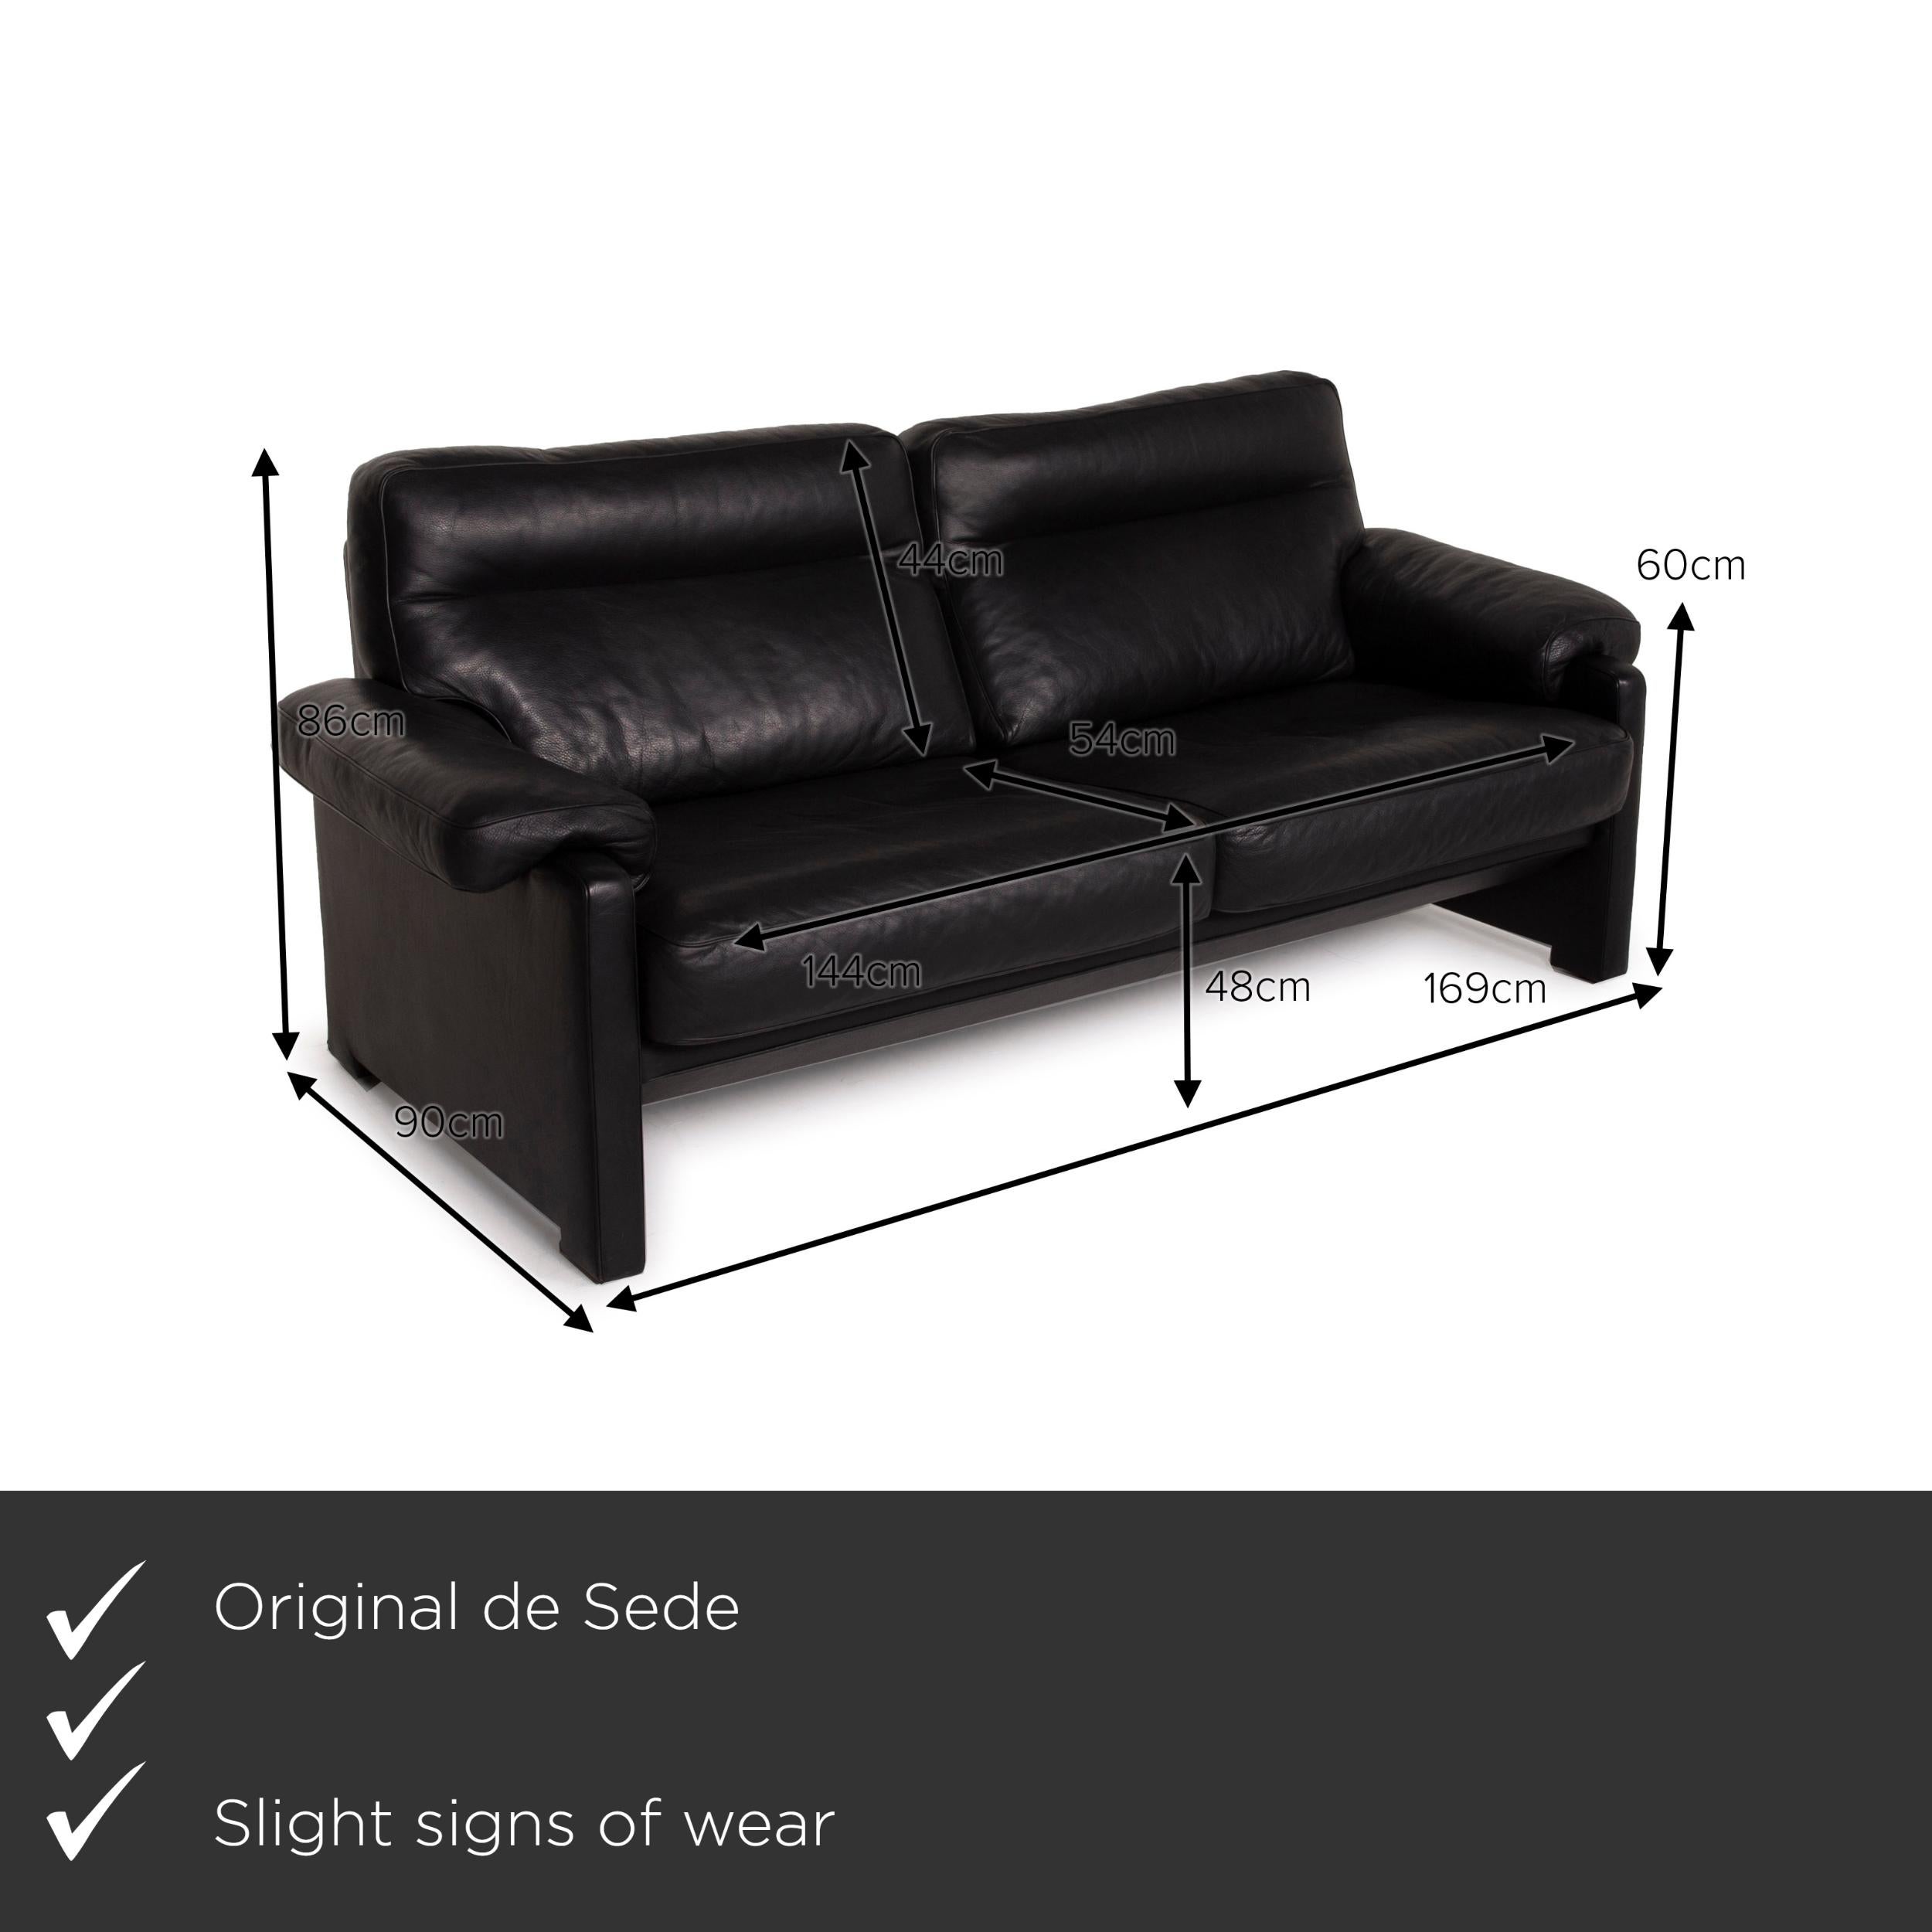 We present to you a de Sede ds 70 leather sofa black three-seater.


 Product measurements in centimeters:
 

Depth: 90
Width: 169
Height: 86
Seat height: 48
Rest height: 60
Seat depth: 54
Seat width: 144
Back height: 44.
 